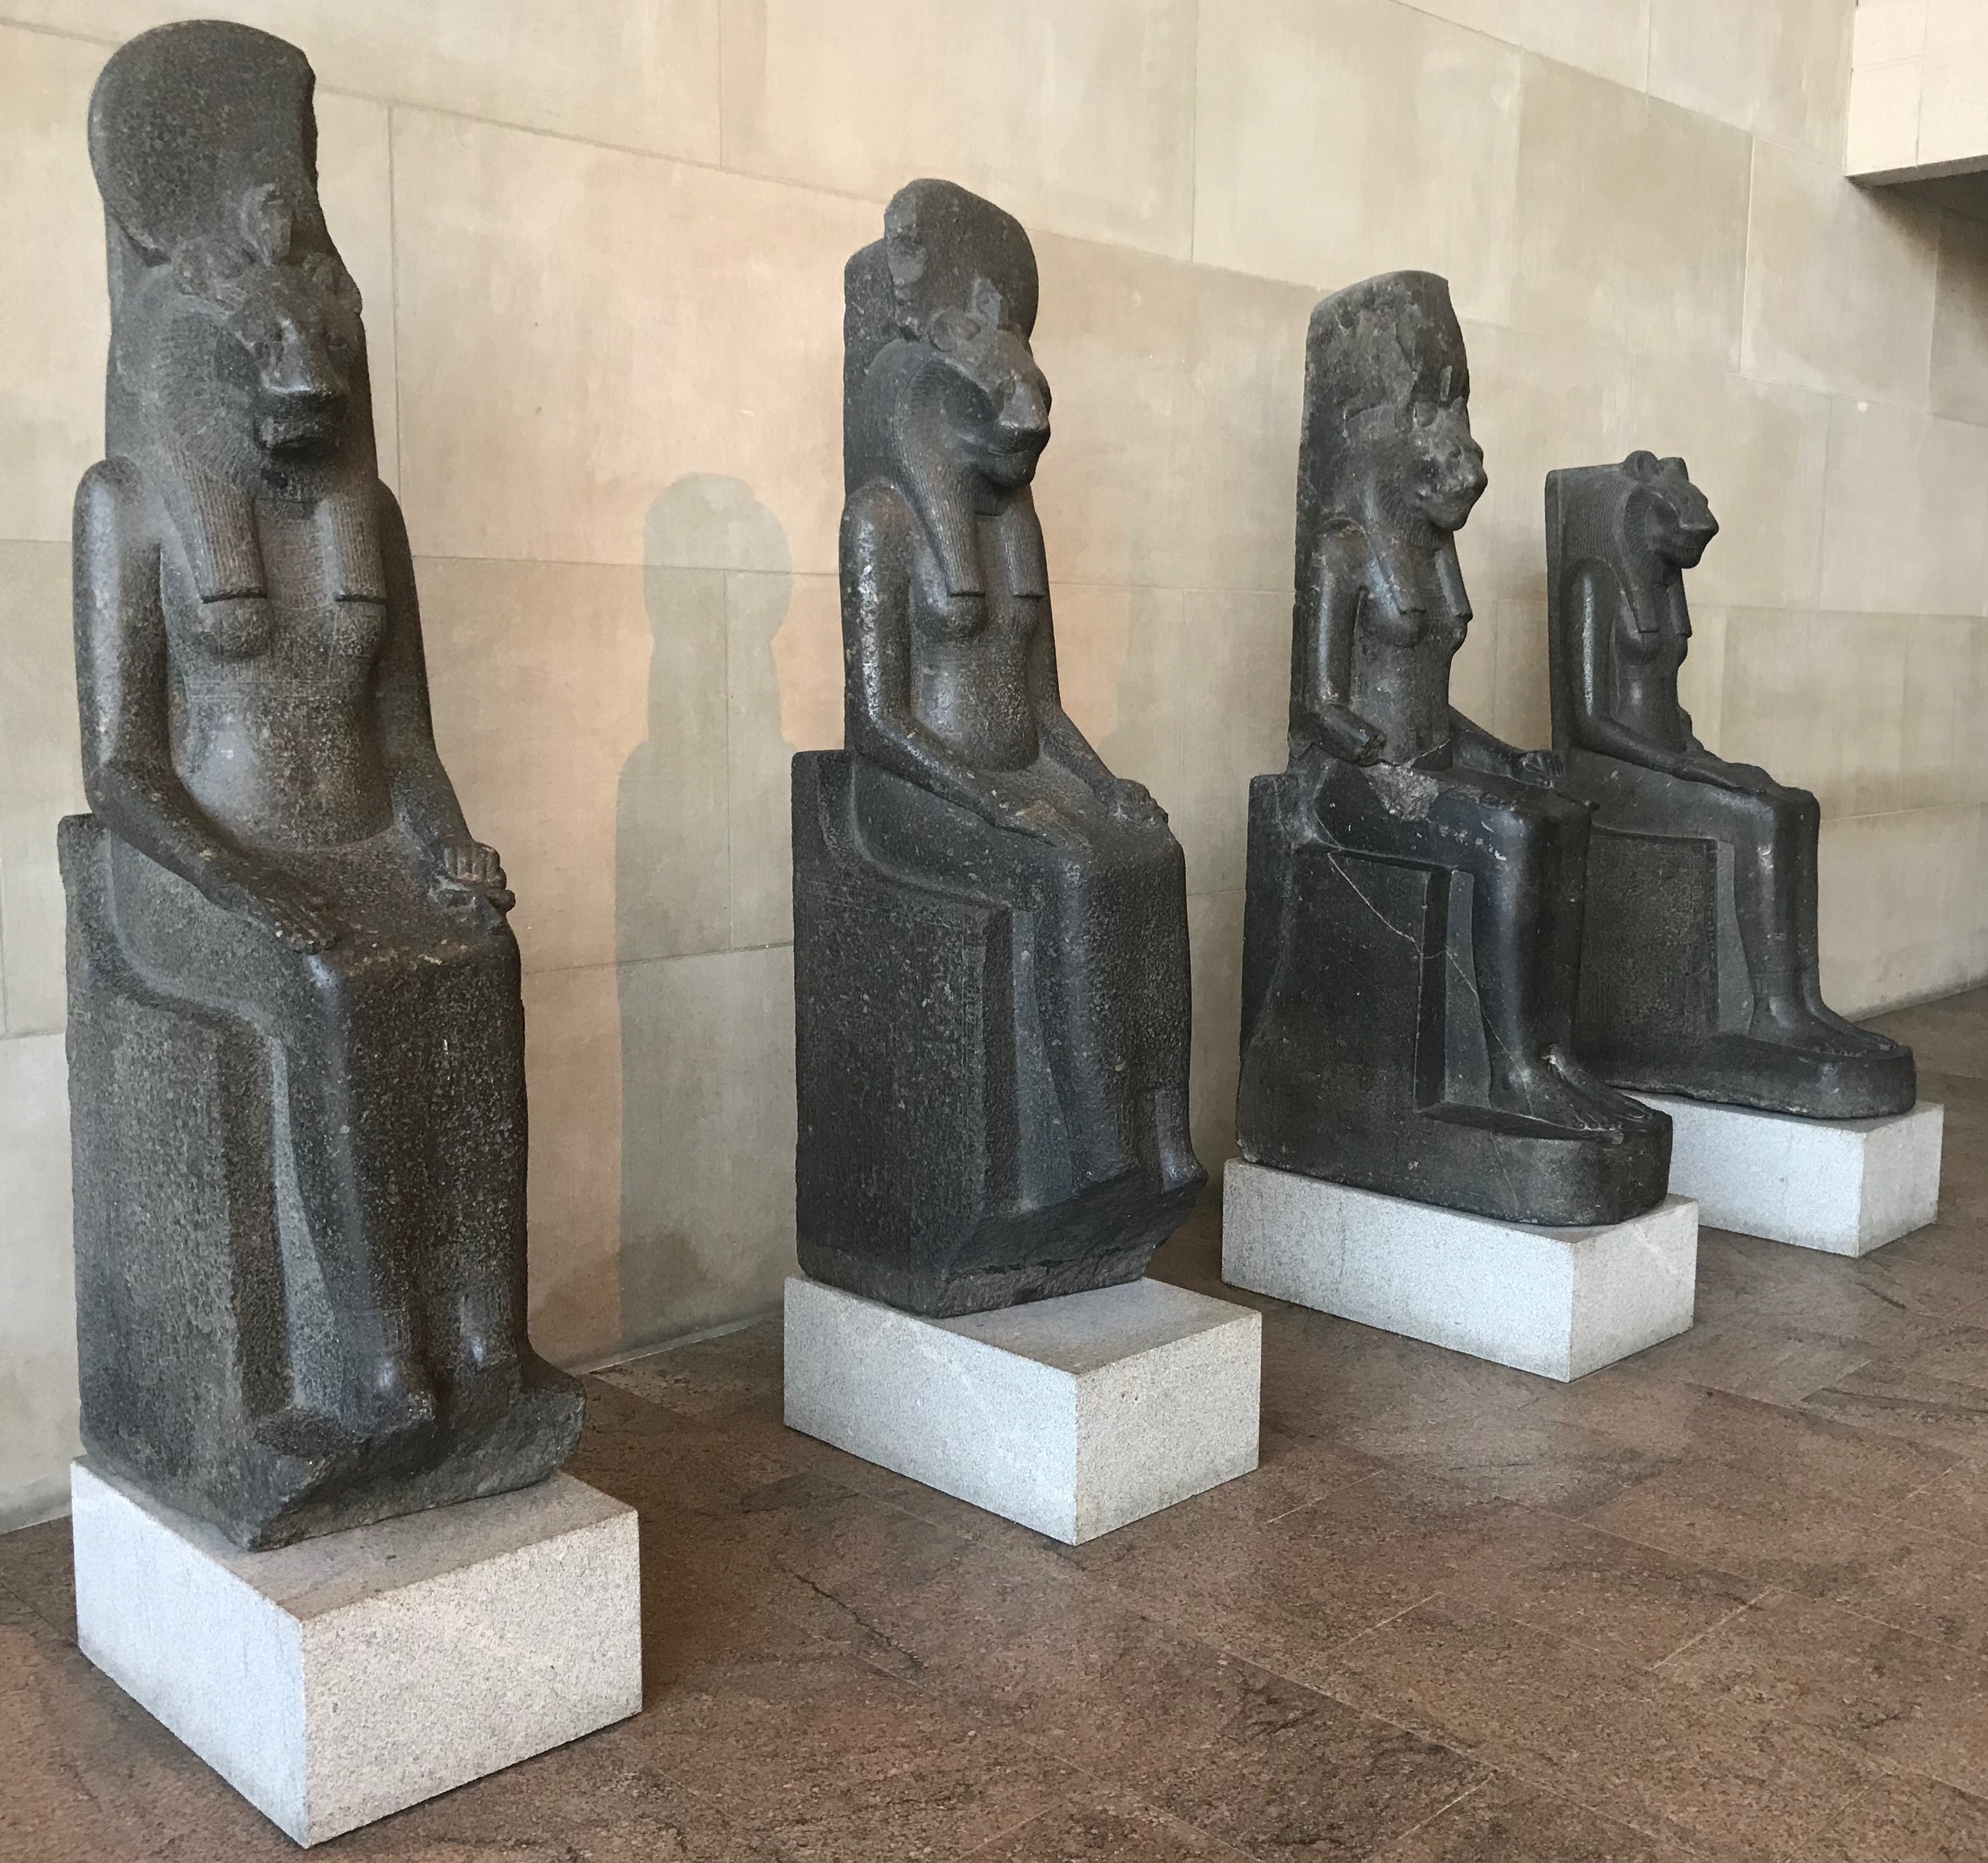 Four statues of the goddess Sachet face the Temple of Dendur in the Sackler Wing at the Metropolitan Museum of Art in New York City. (DCNF/Ethan Barton)